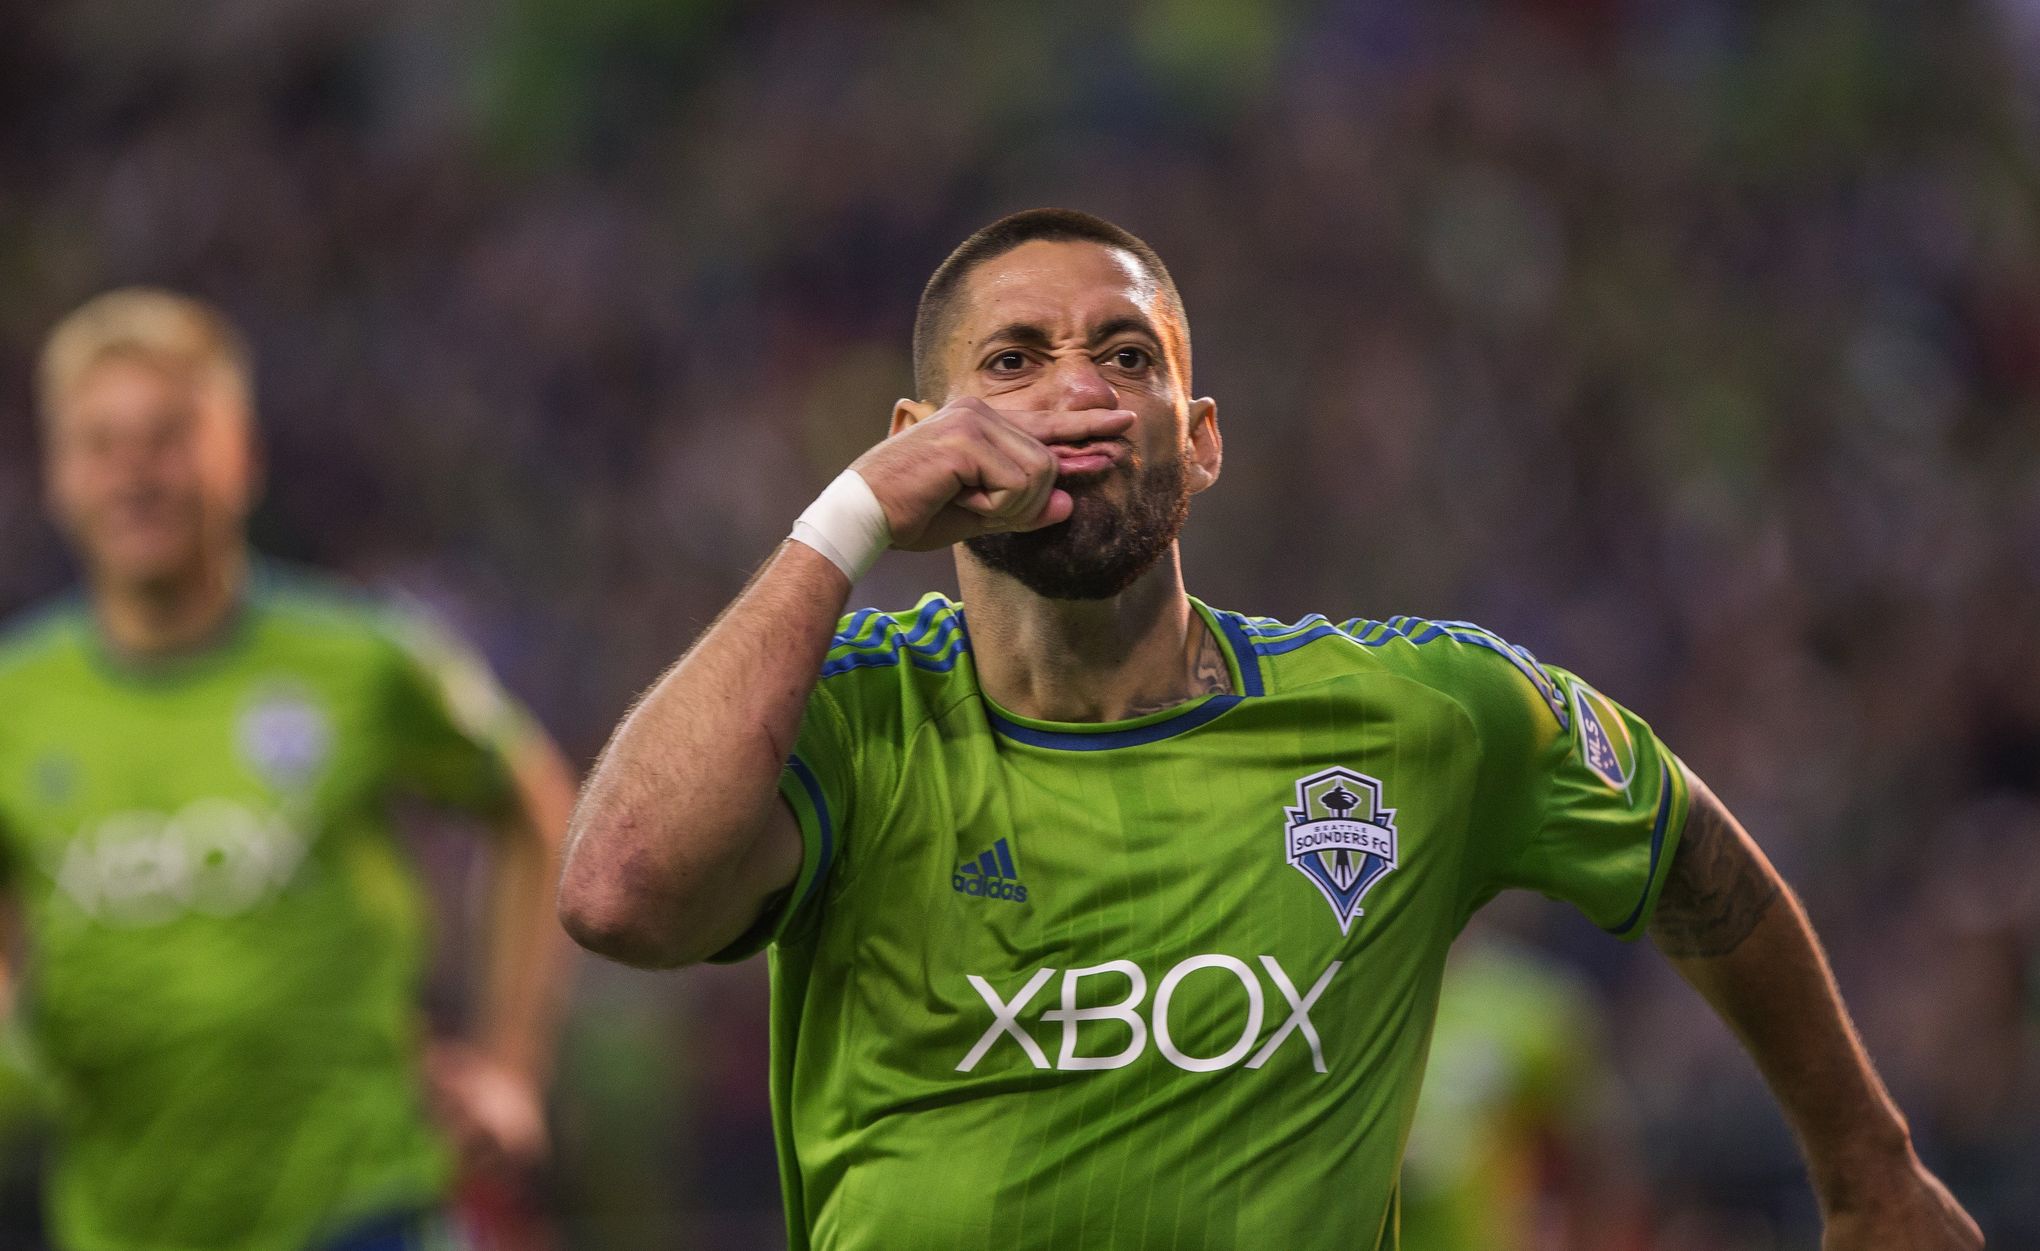 Former Revolution star Clint Dempsey retires from soccer - The